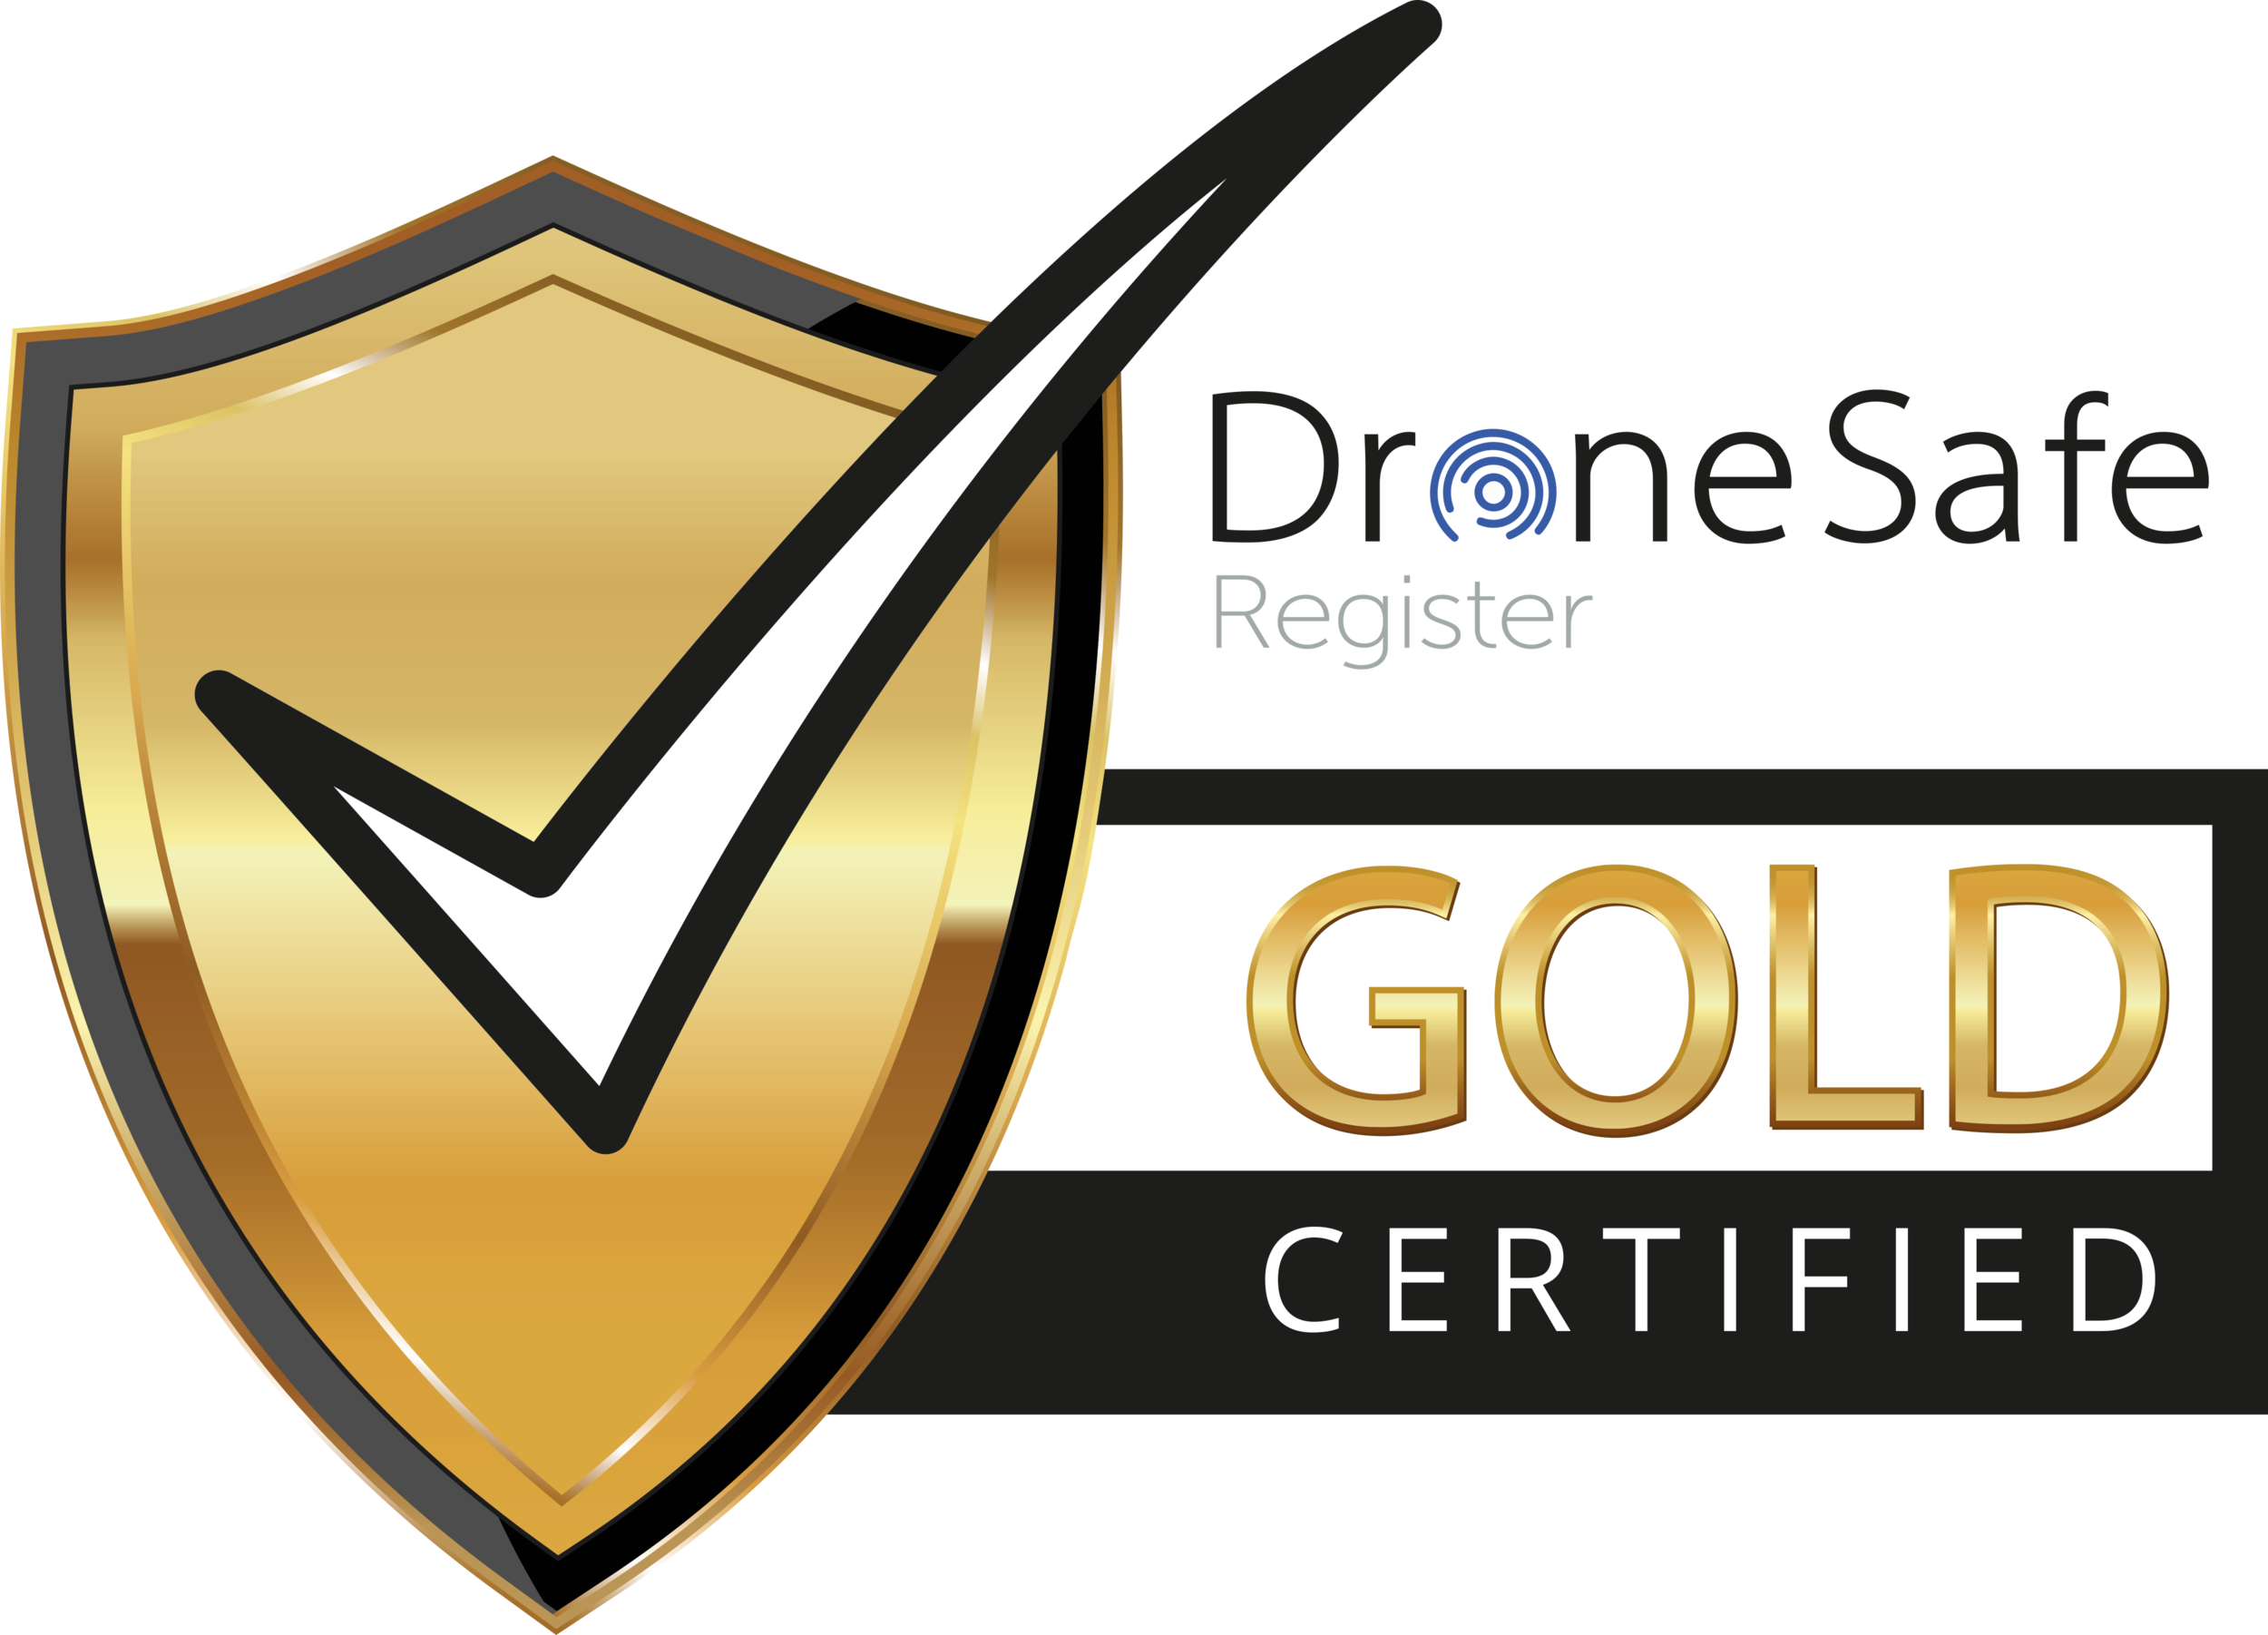 DSR-gold-certified.png